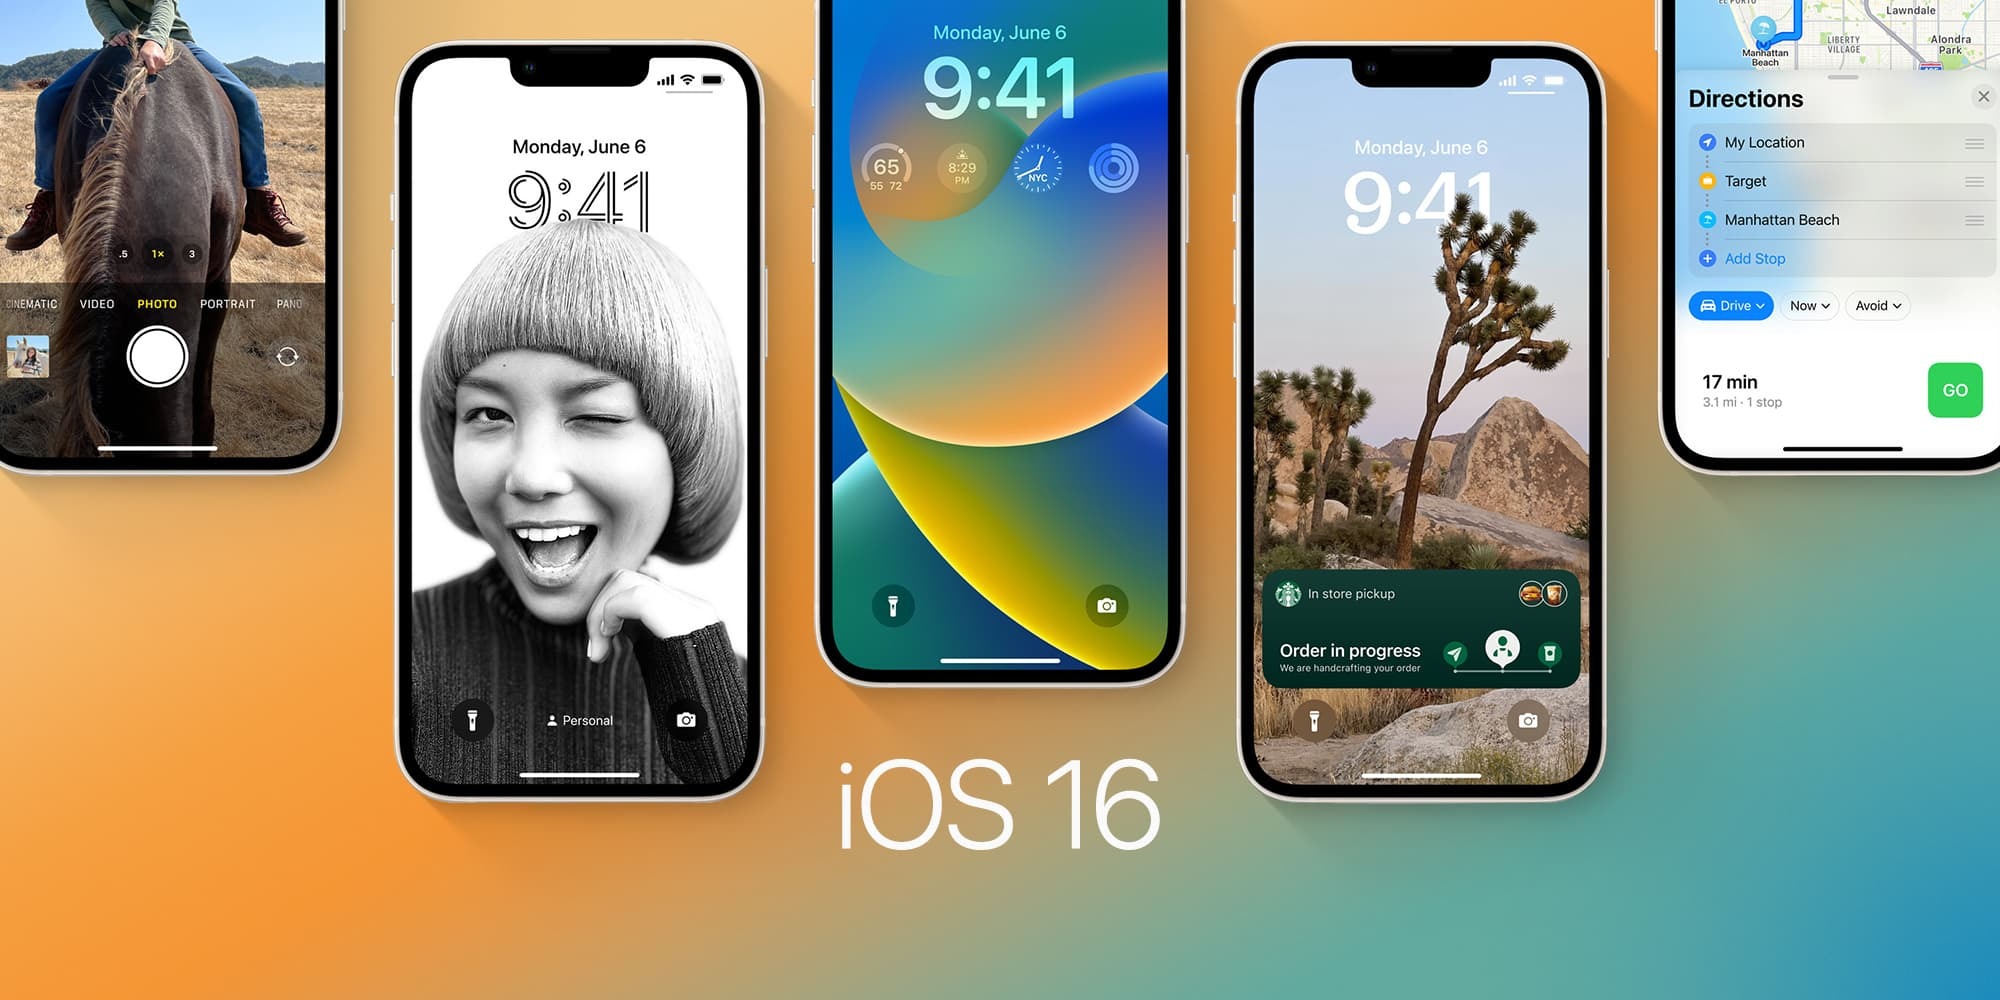 When does iOS 16 come out? - 9to5Mac